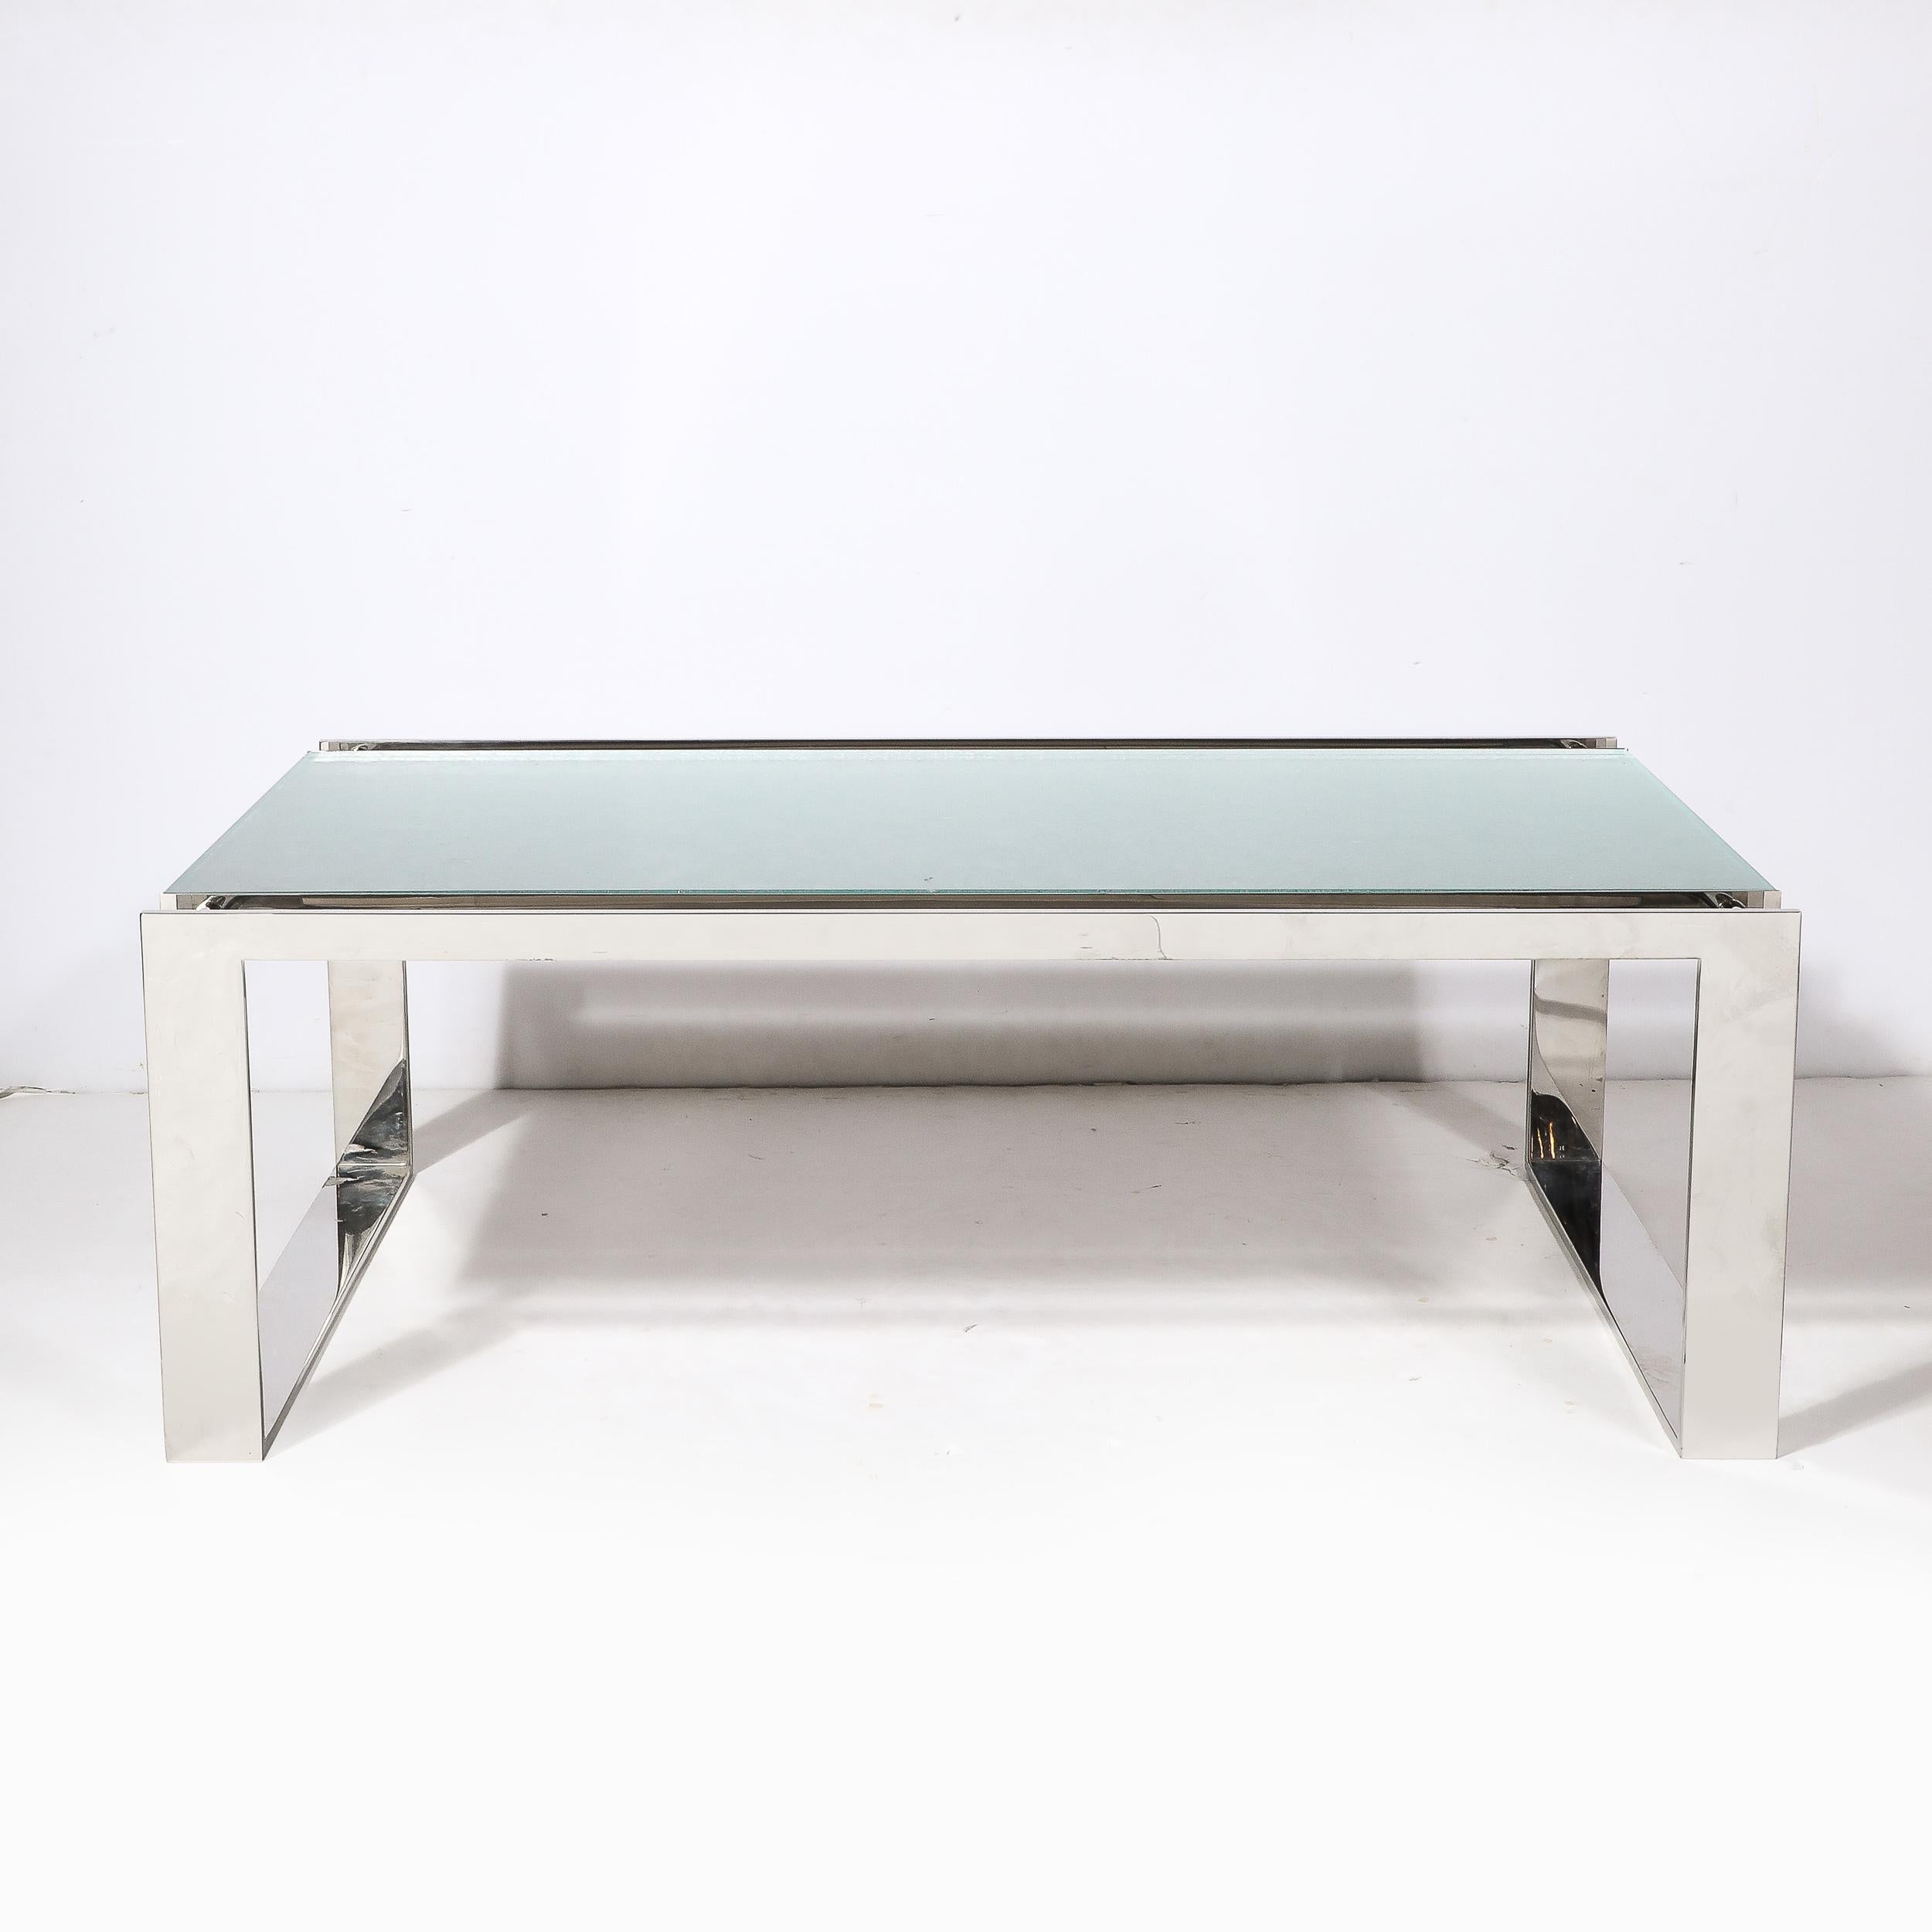 This sleek and substantial Modernist nickel and Lucite Glacial Cocktail Table is by Lorin Marsh and originates from the United States during the late 20th Century. Features a rectilinear construction in bands of polished nickel composing the base